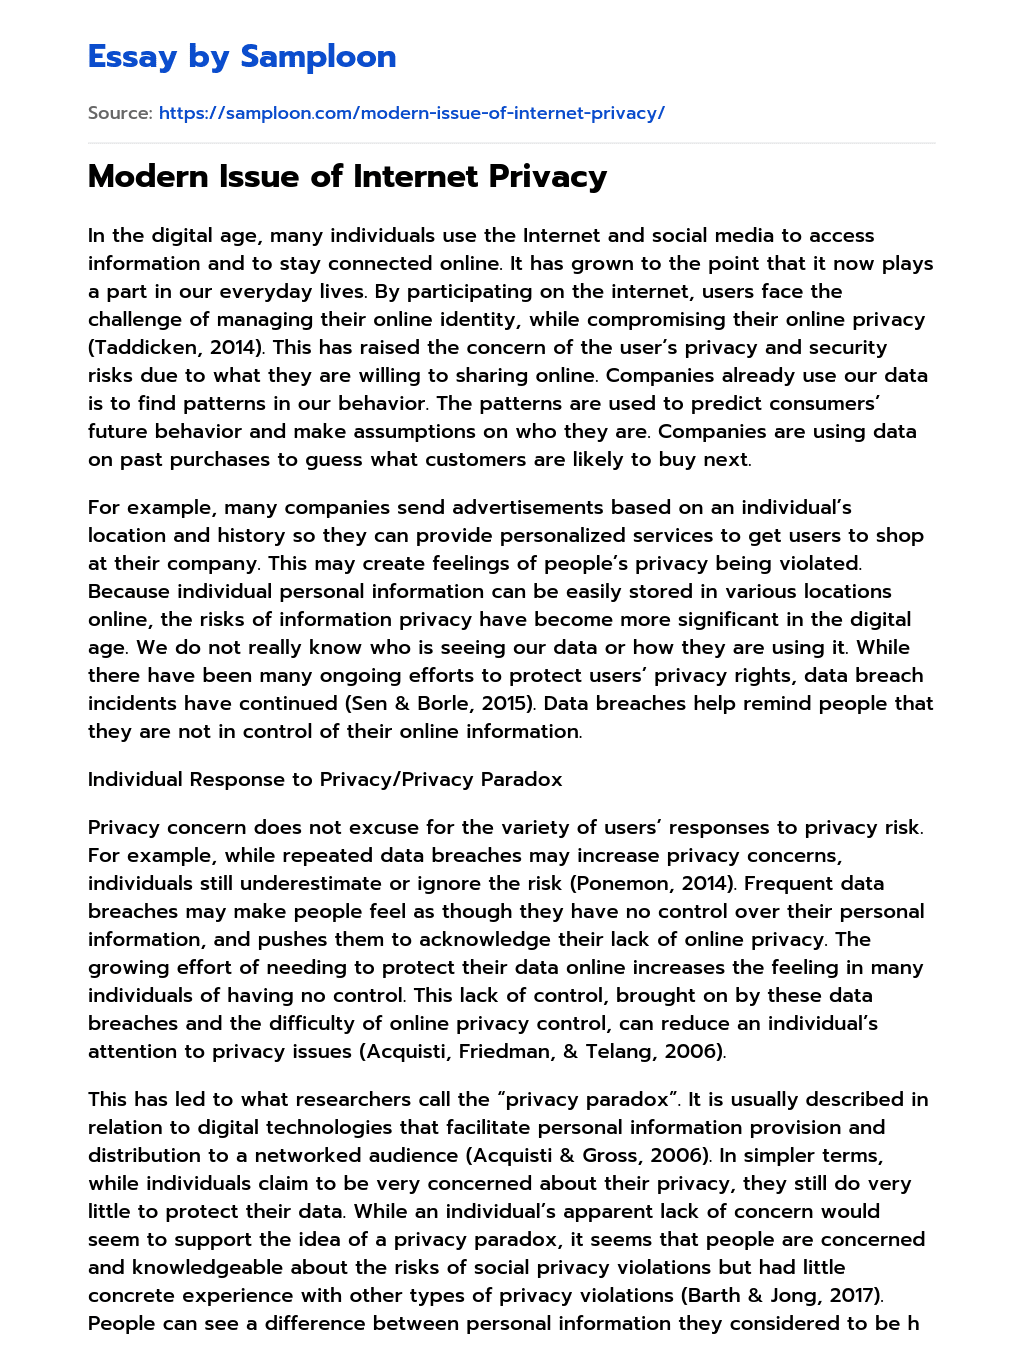 Modern Issue of Internet Privacy essay